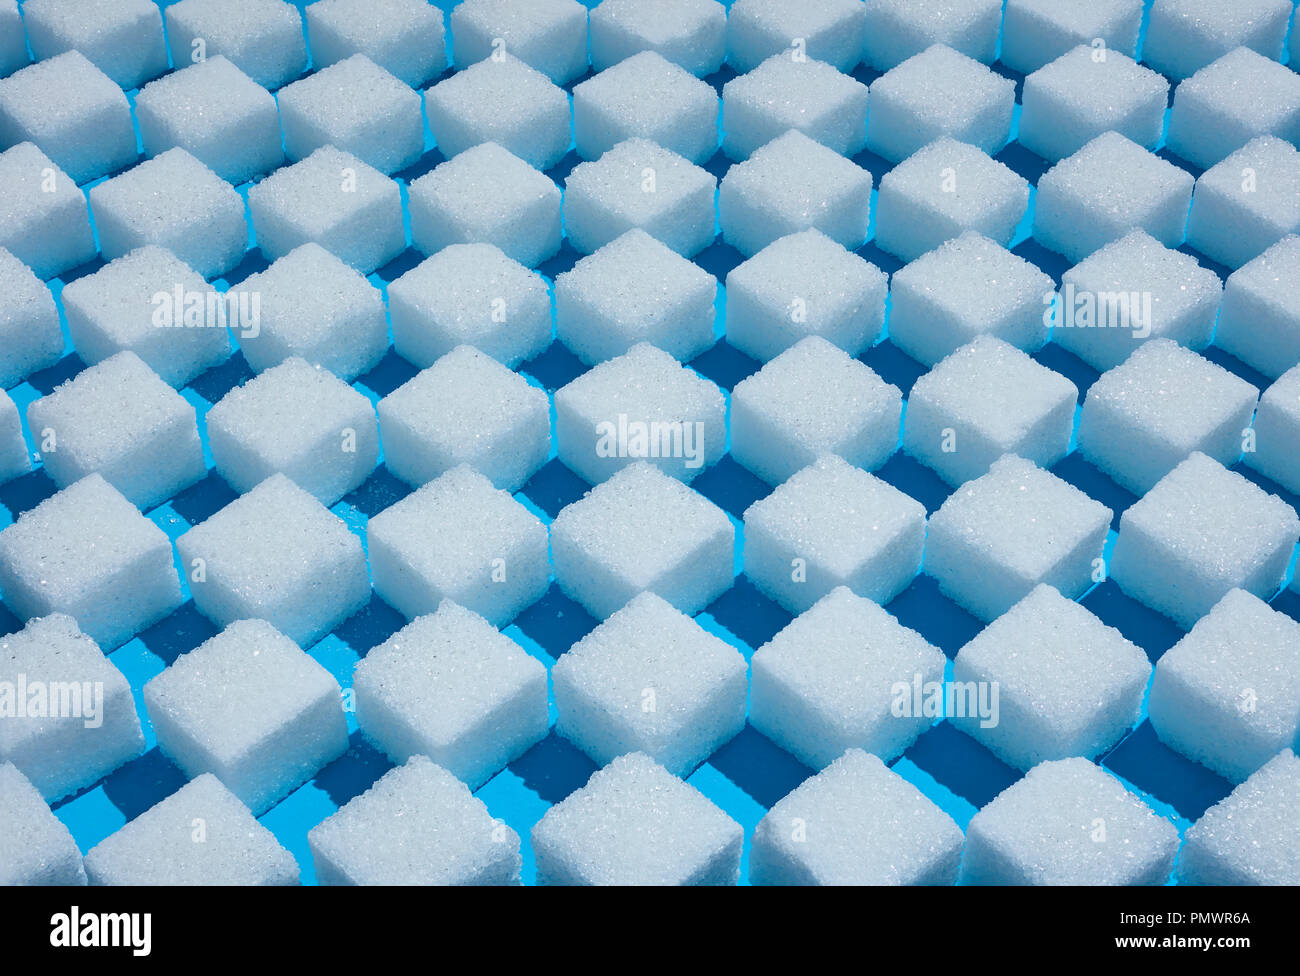 Full frame sugar cube checkered pattern on blue background Stock Photo